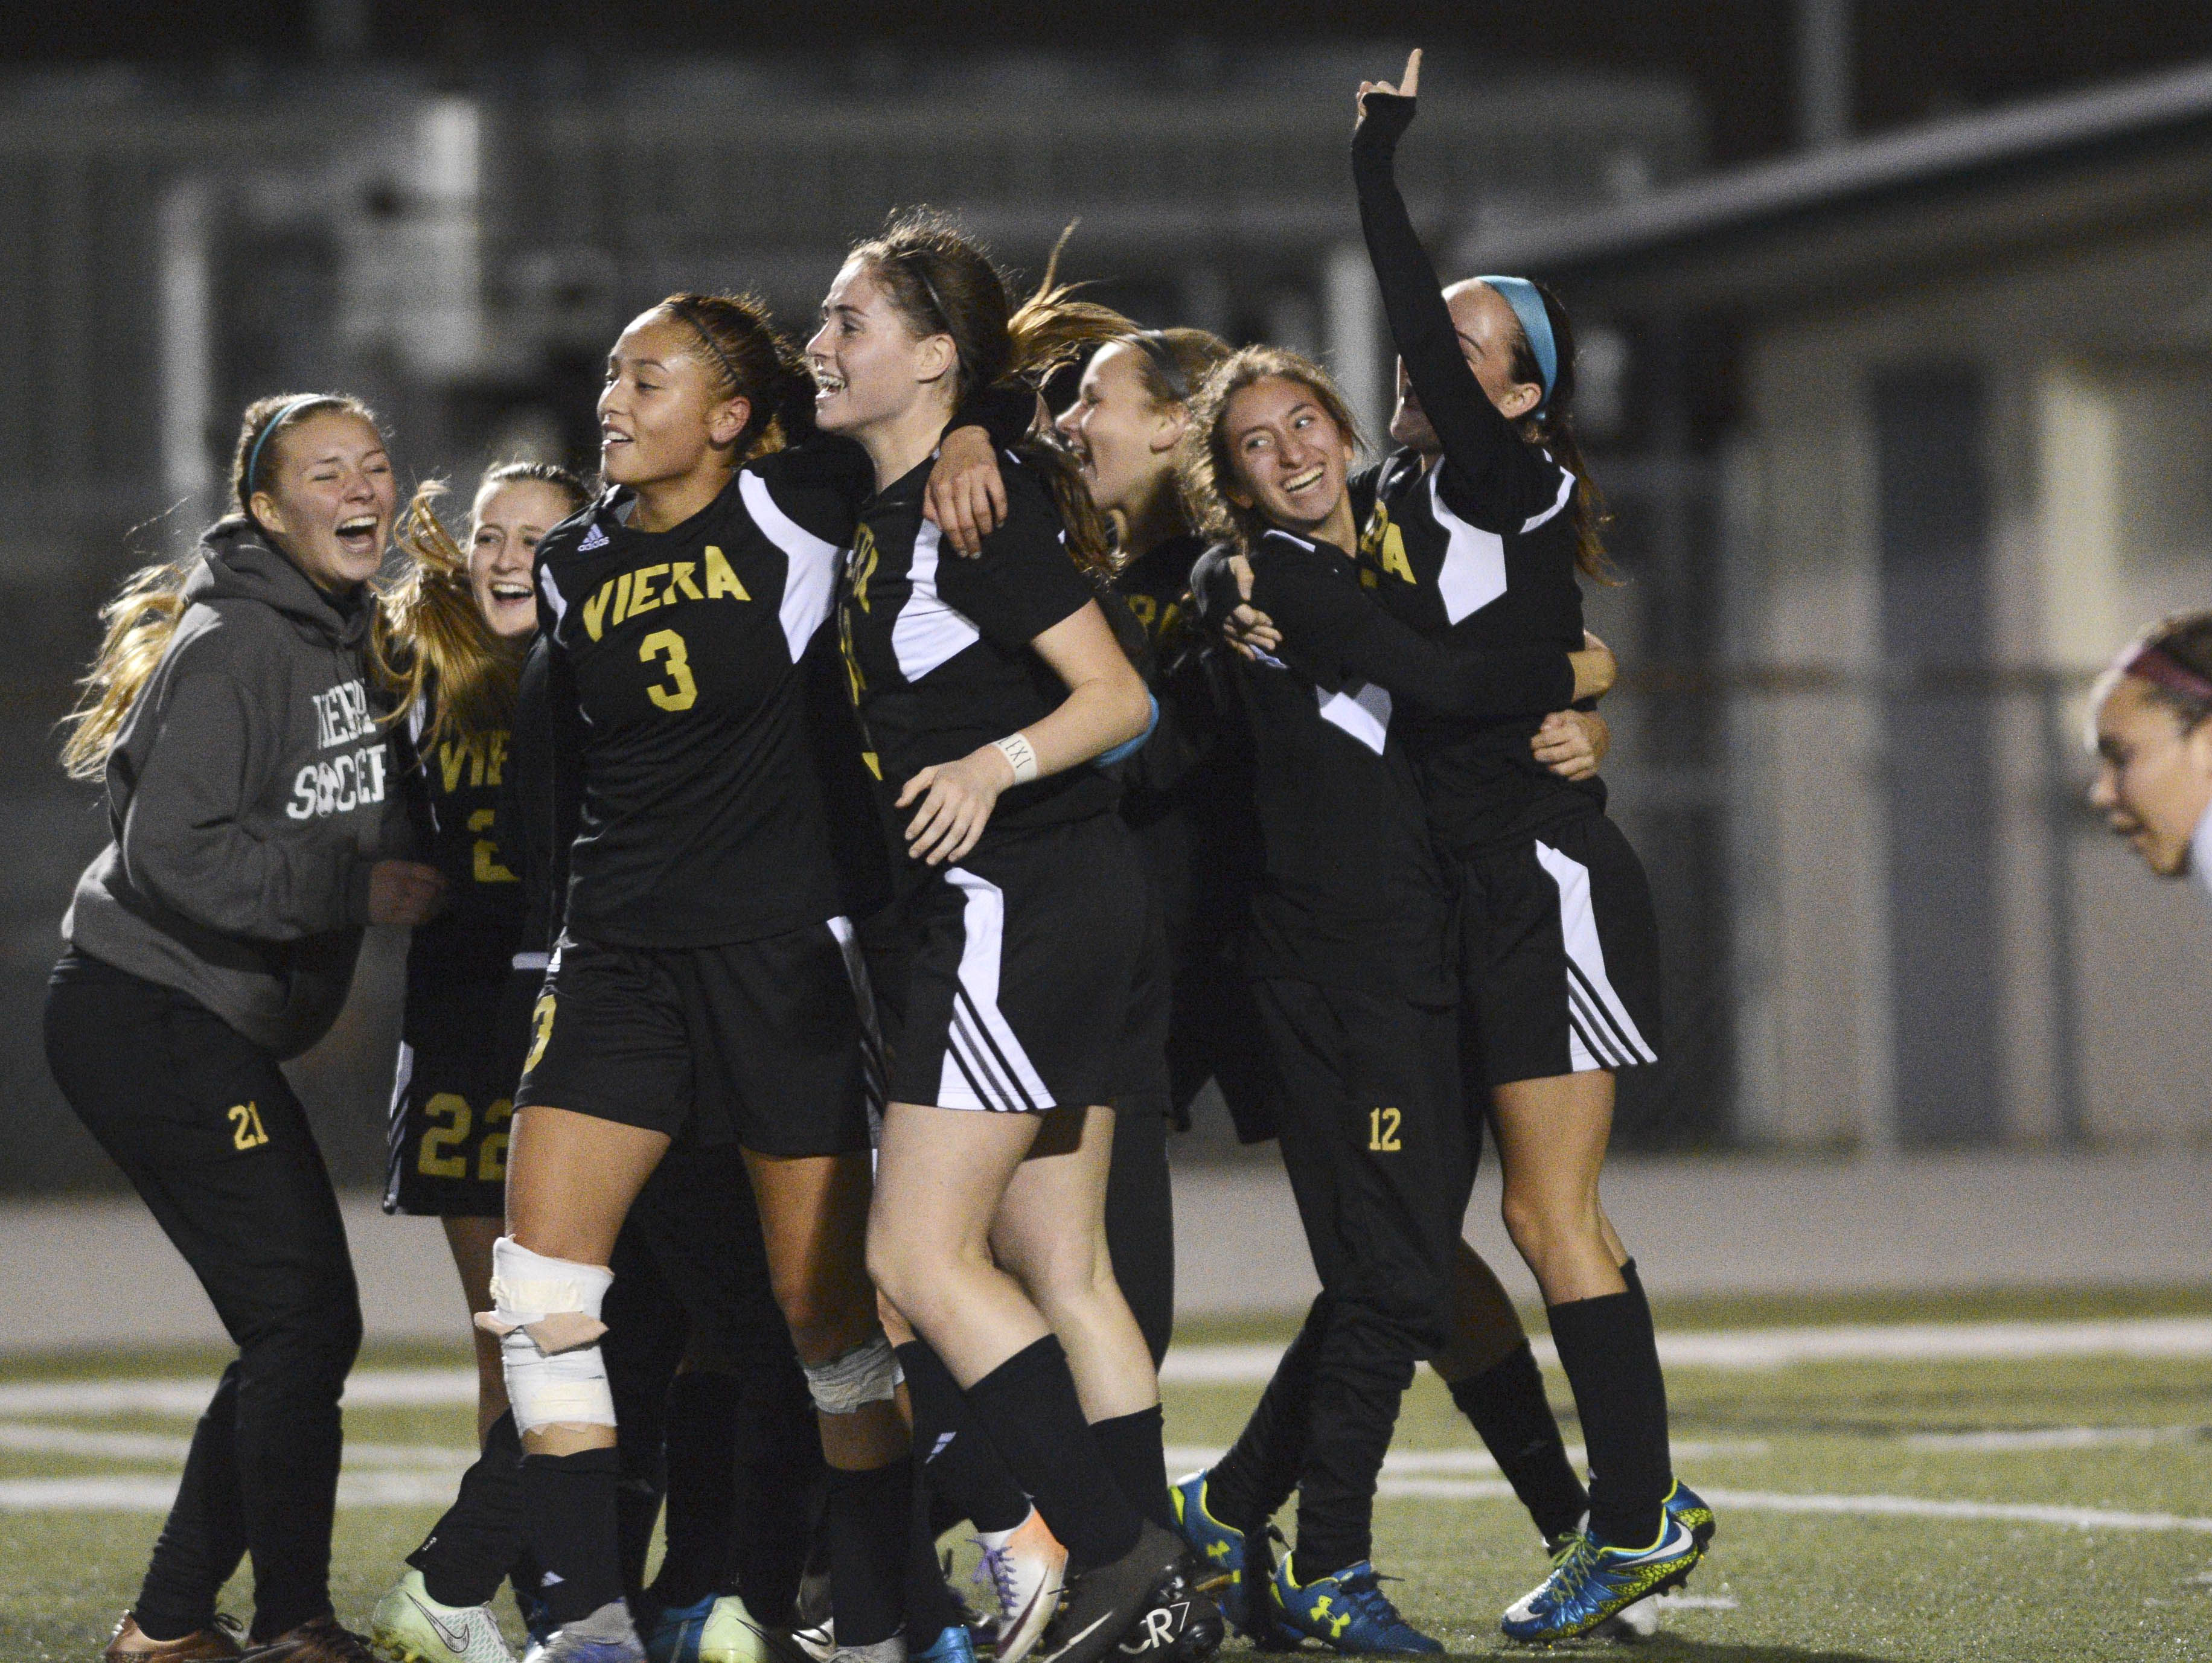 Viera players celebrate their win during Friday's Class 4A state soccer final.